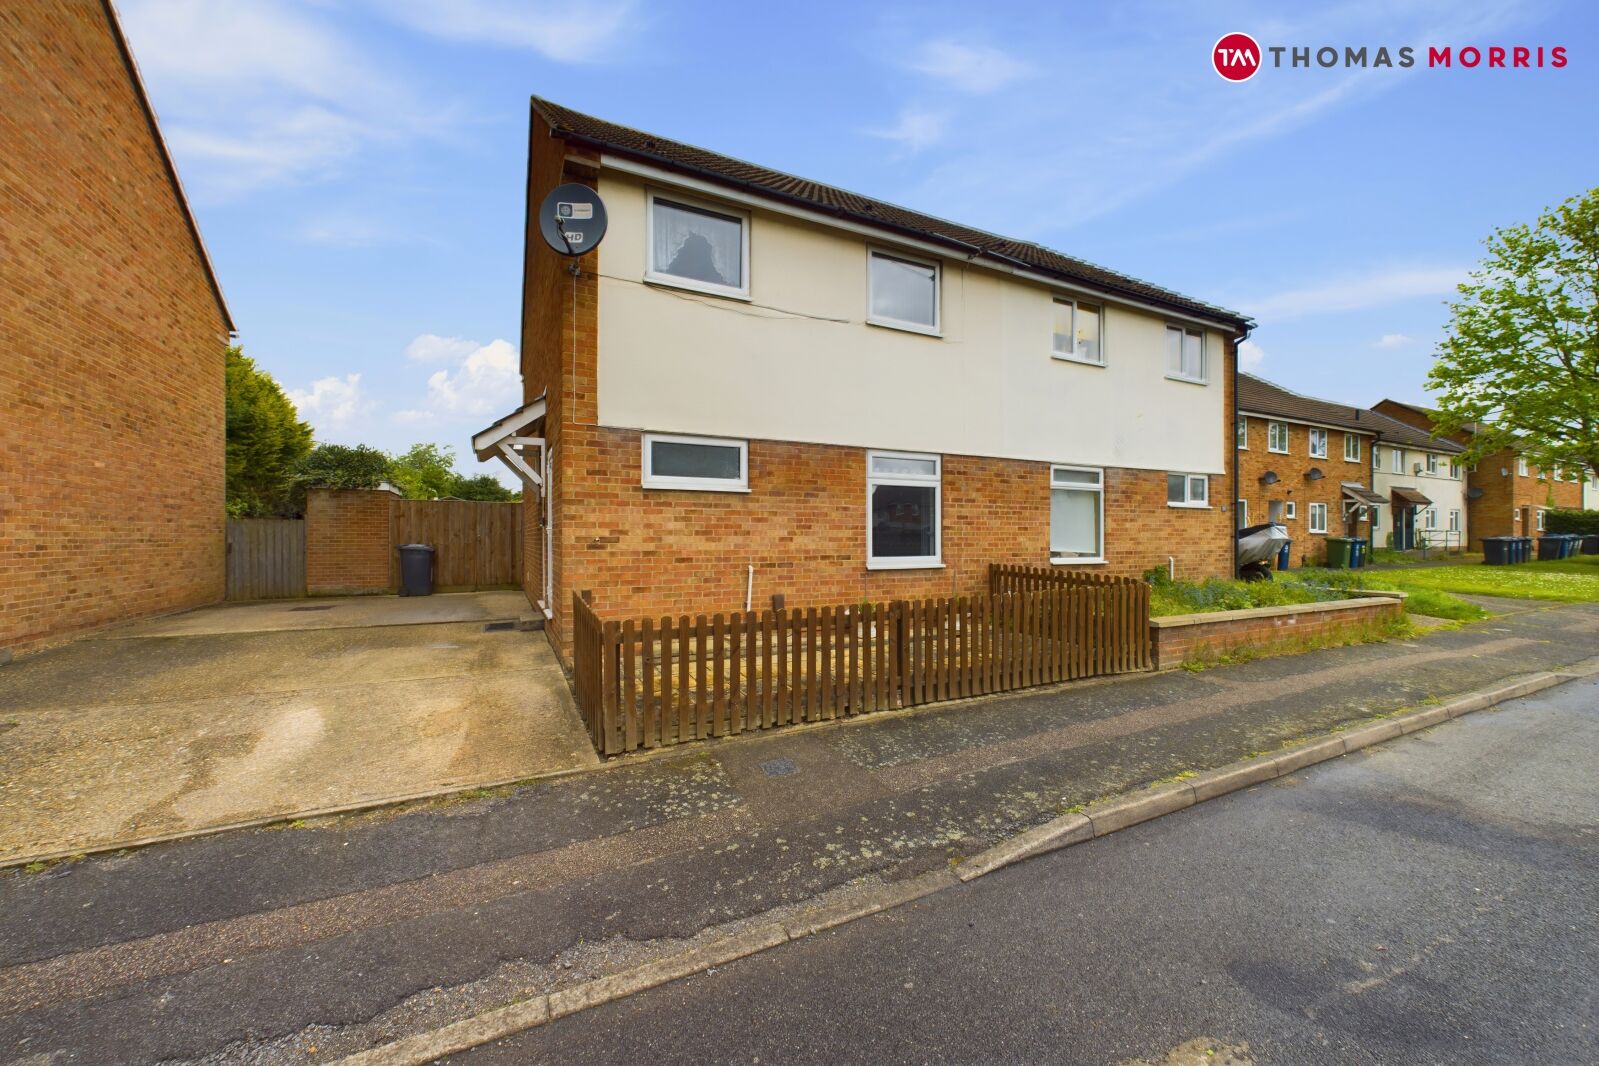 3 bedroom semi detached house to rent, Available now Bevan Close, Huntingdon, PE29, main image